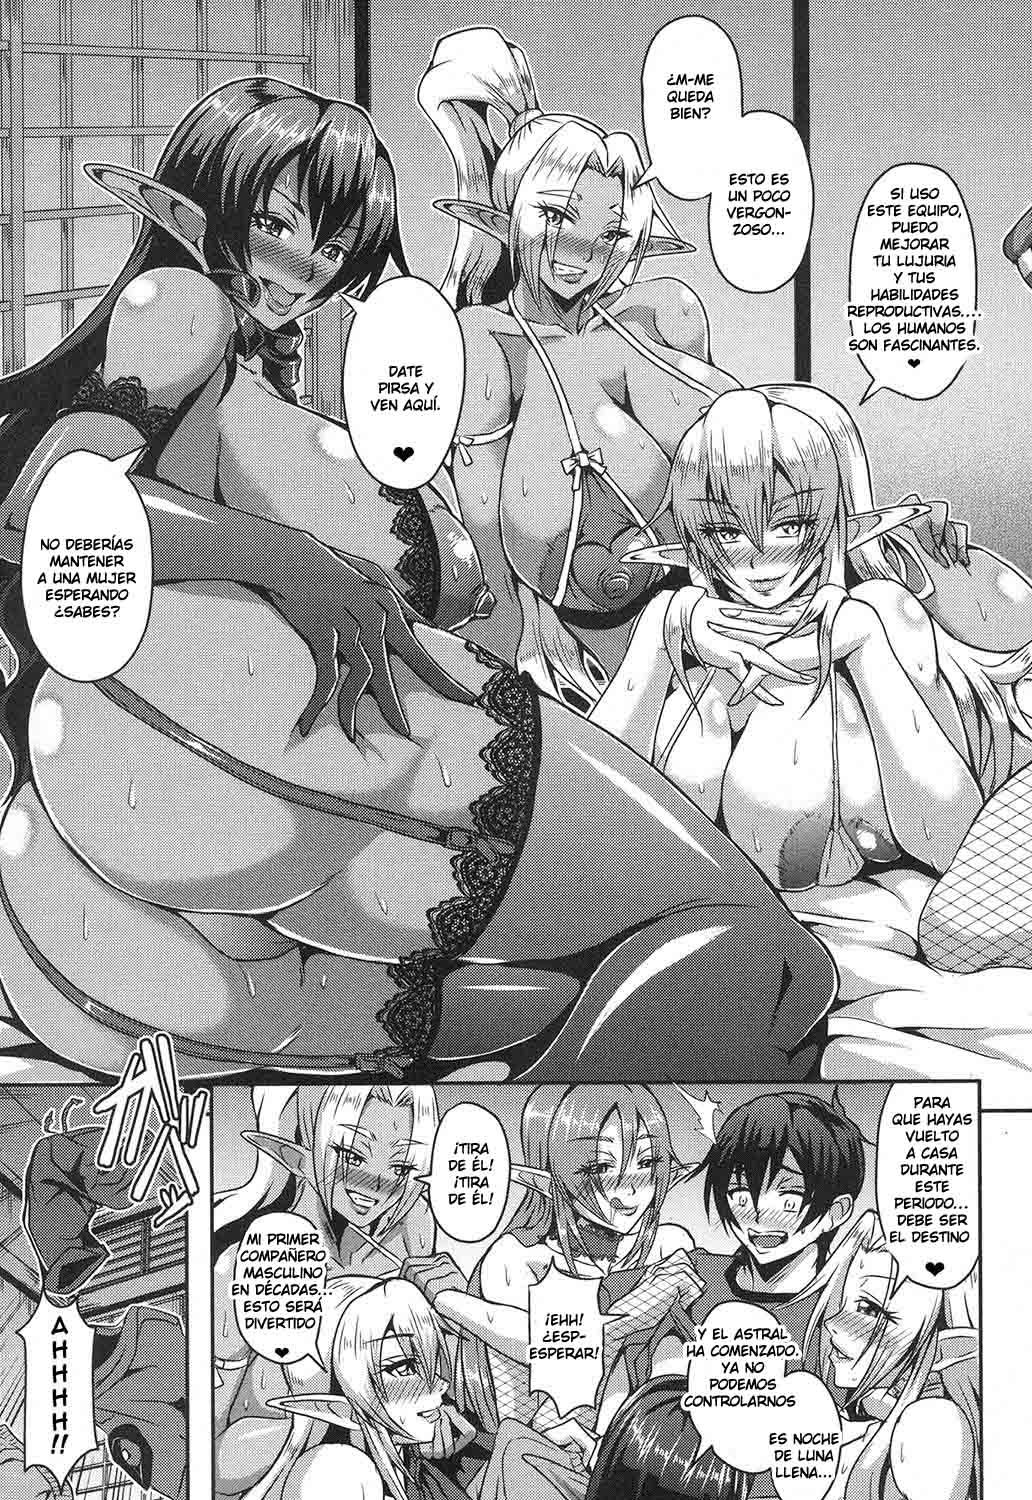 Baby-making contract with a harem of forest elves - 10